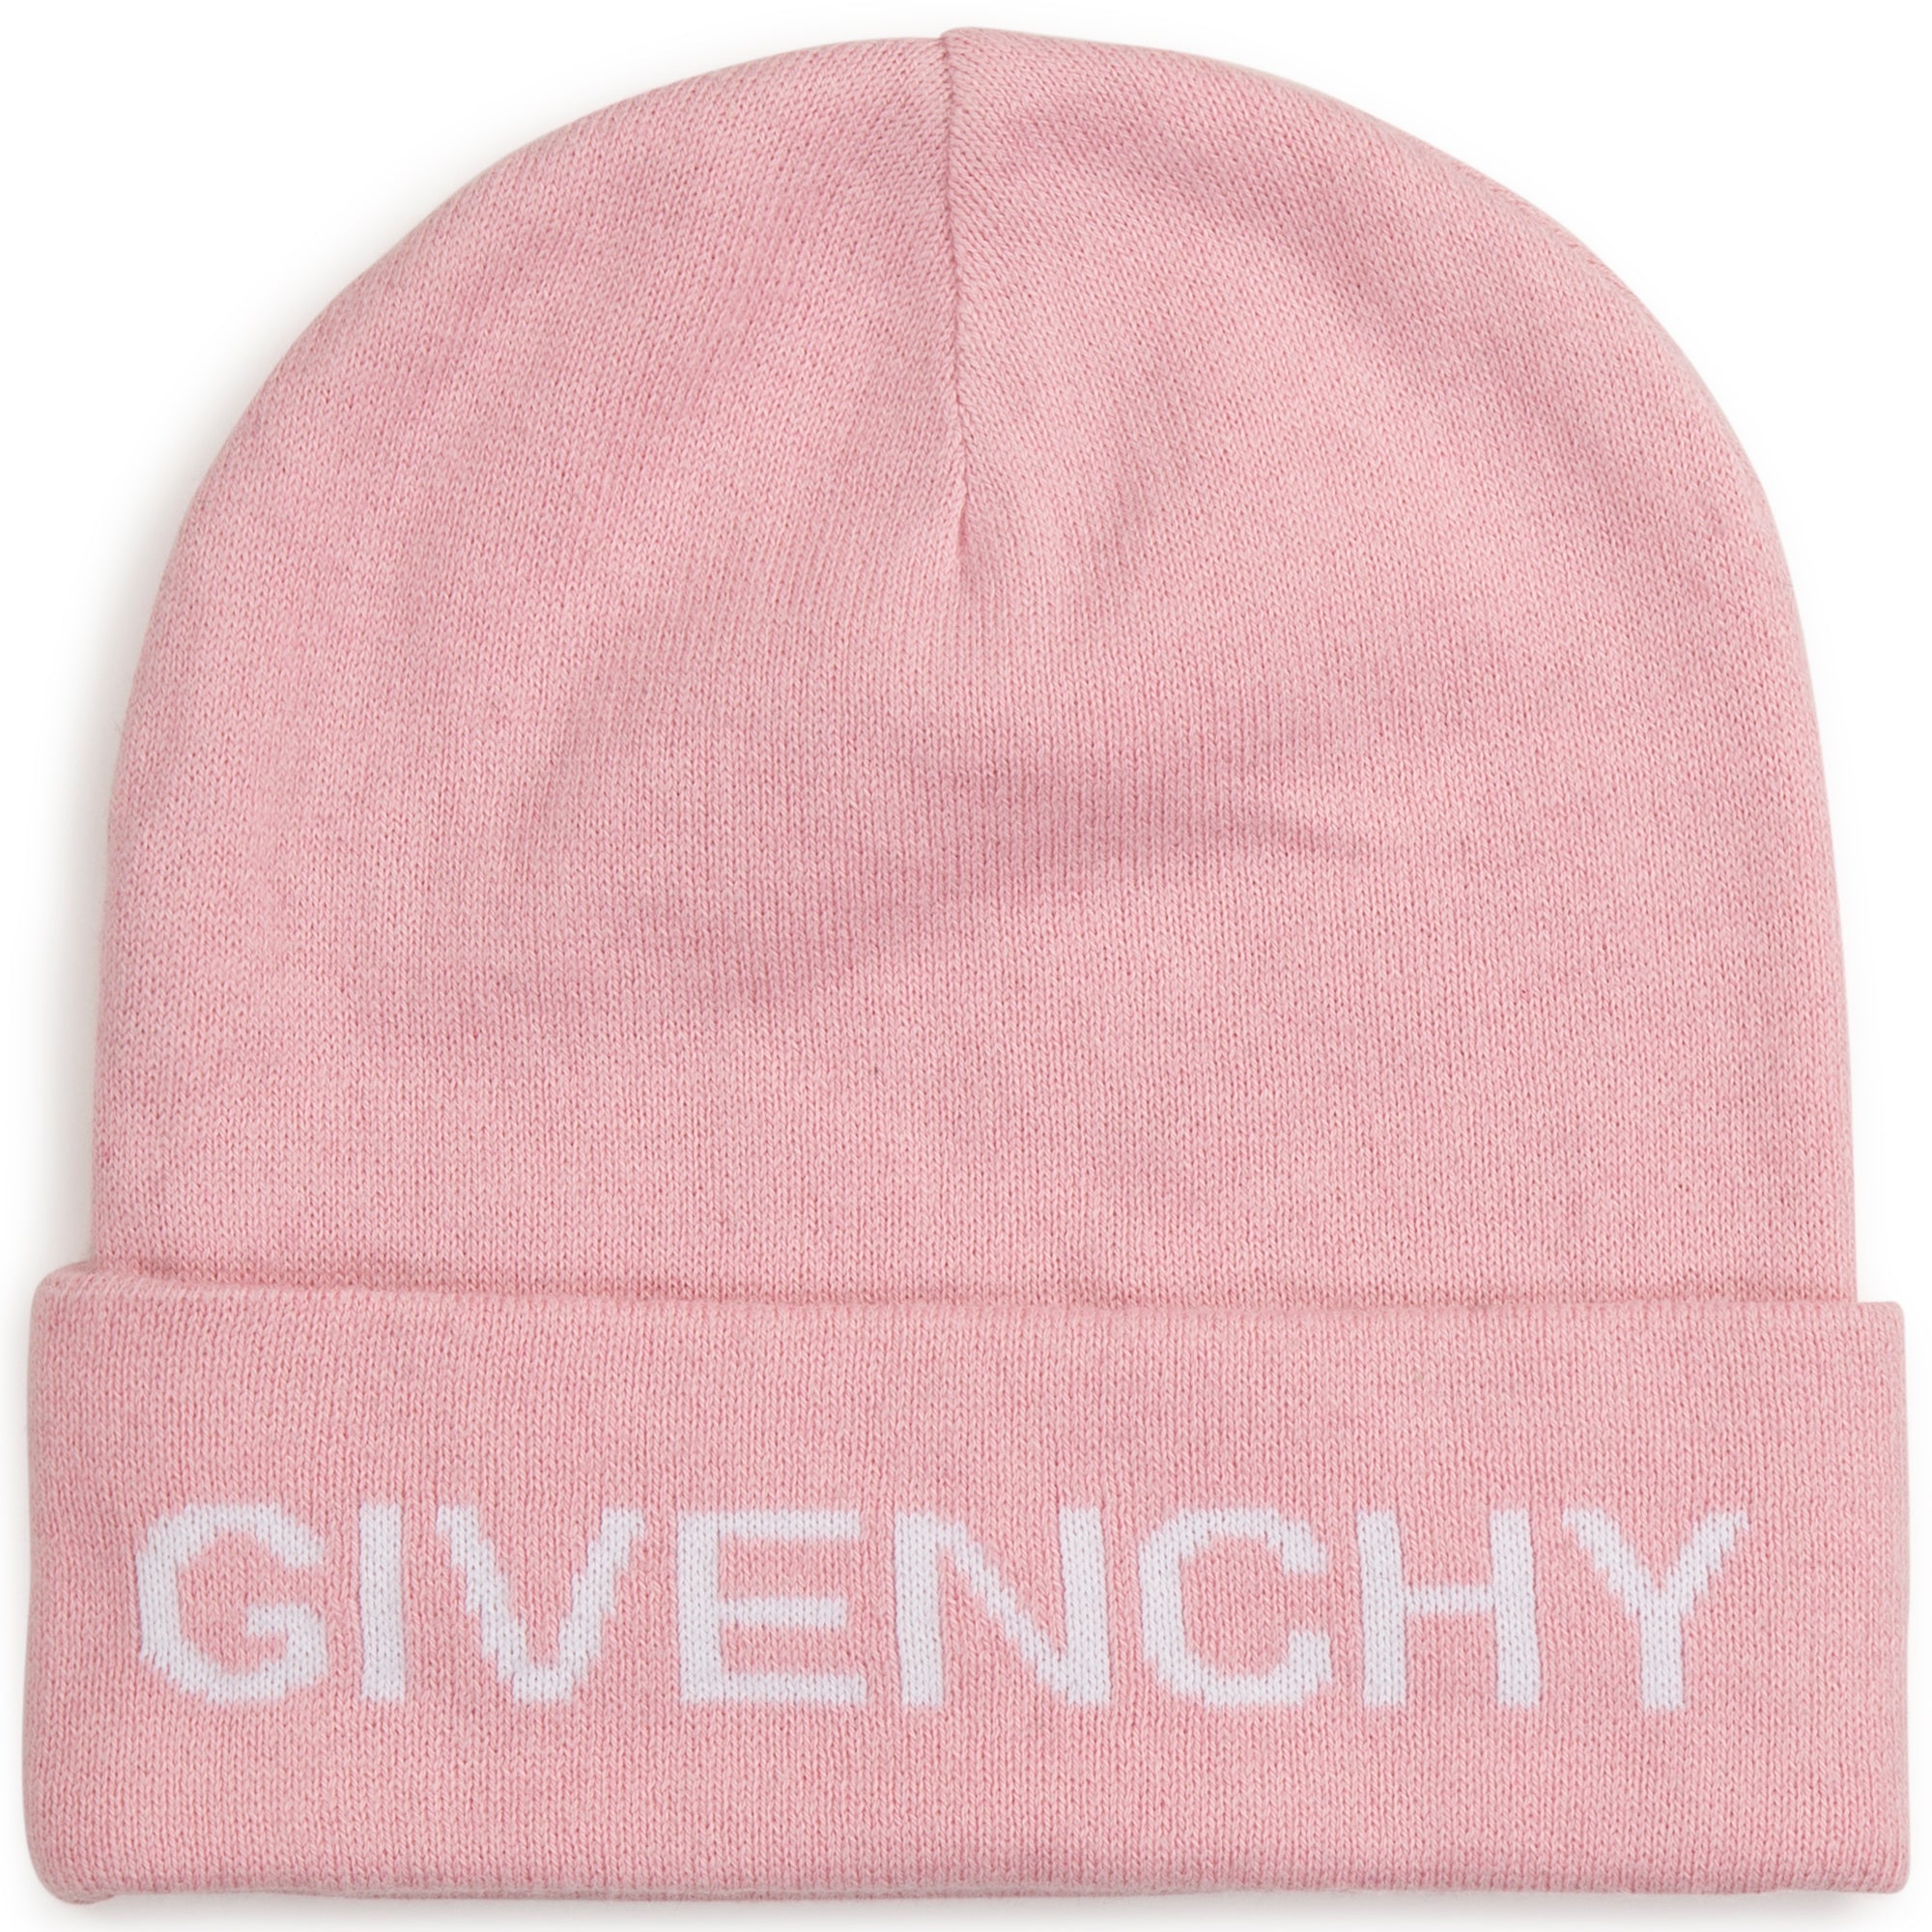 Givenchy Pull On Hat Style: H11023